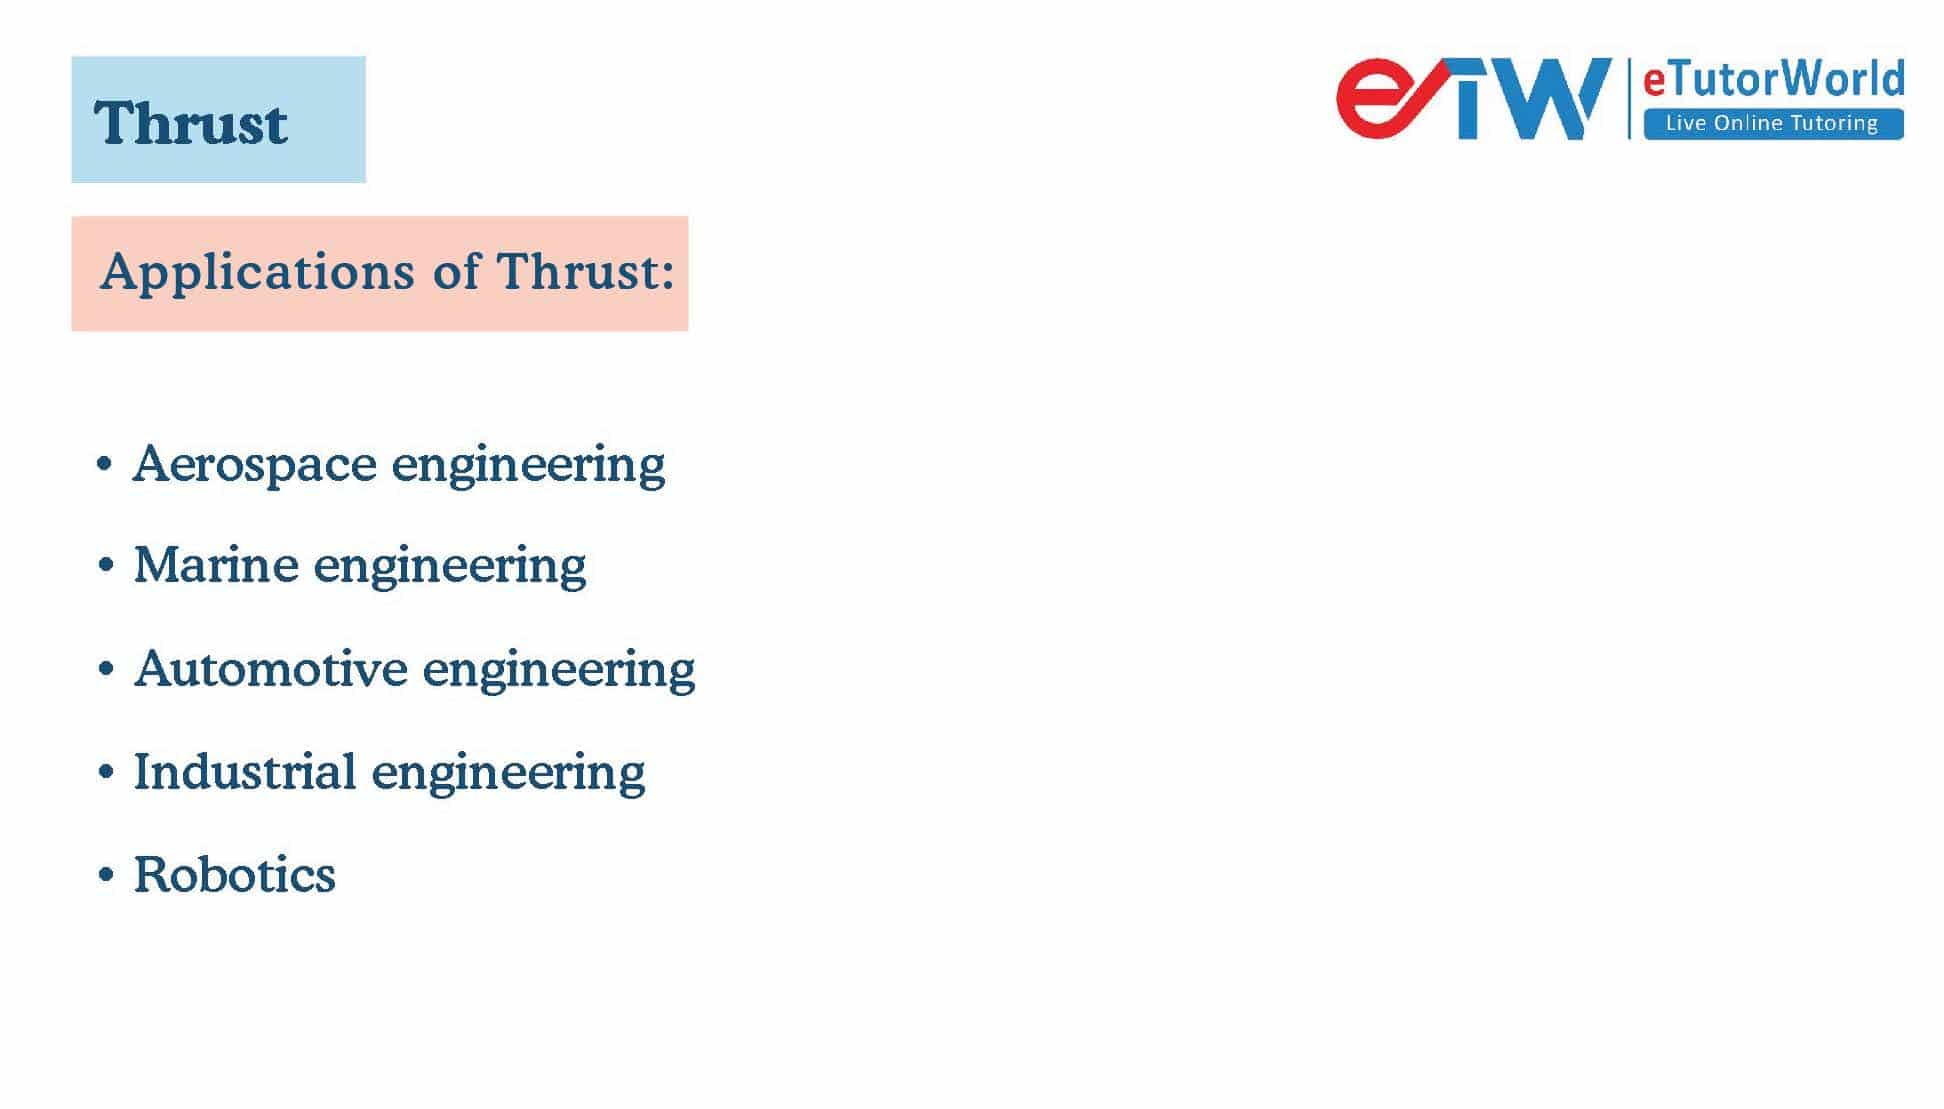 Applications of thrust